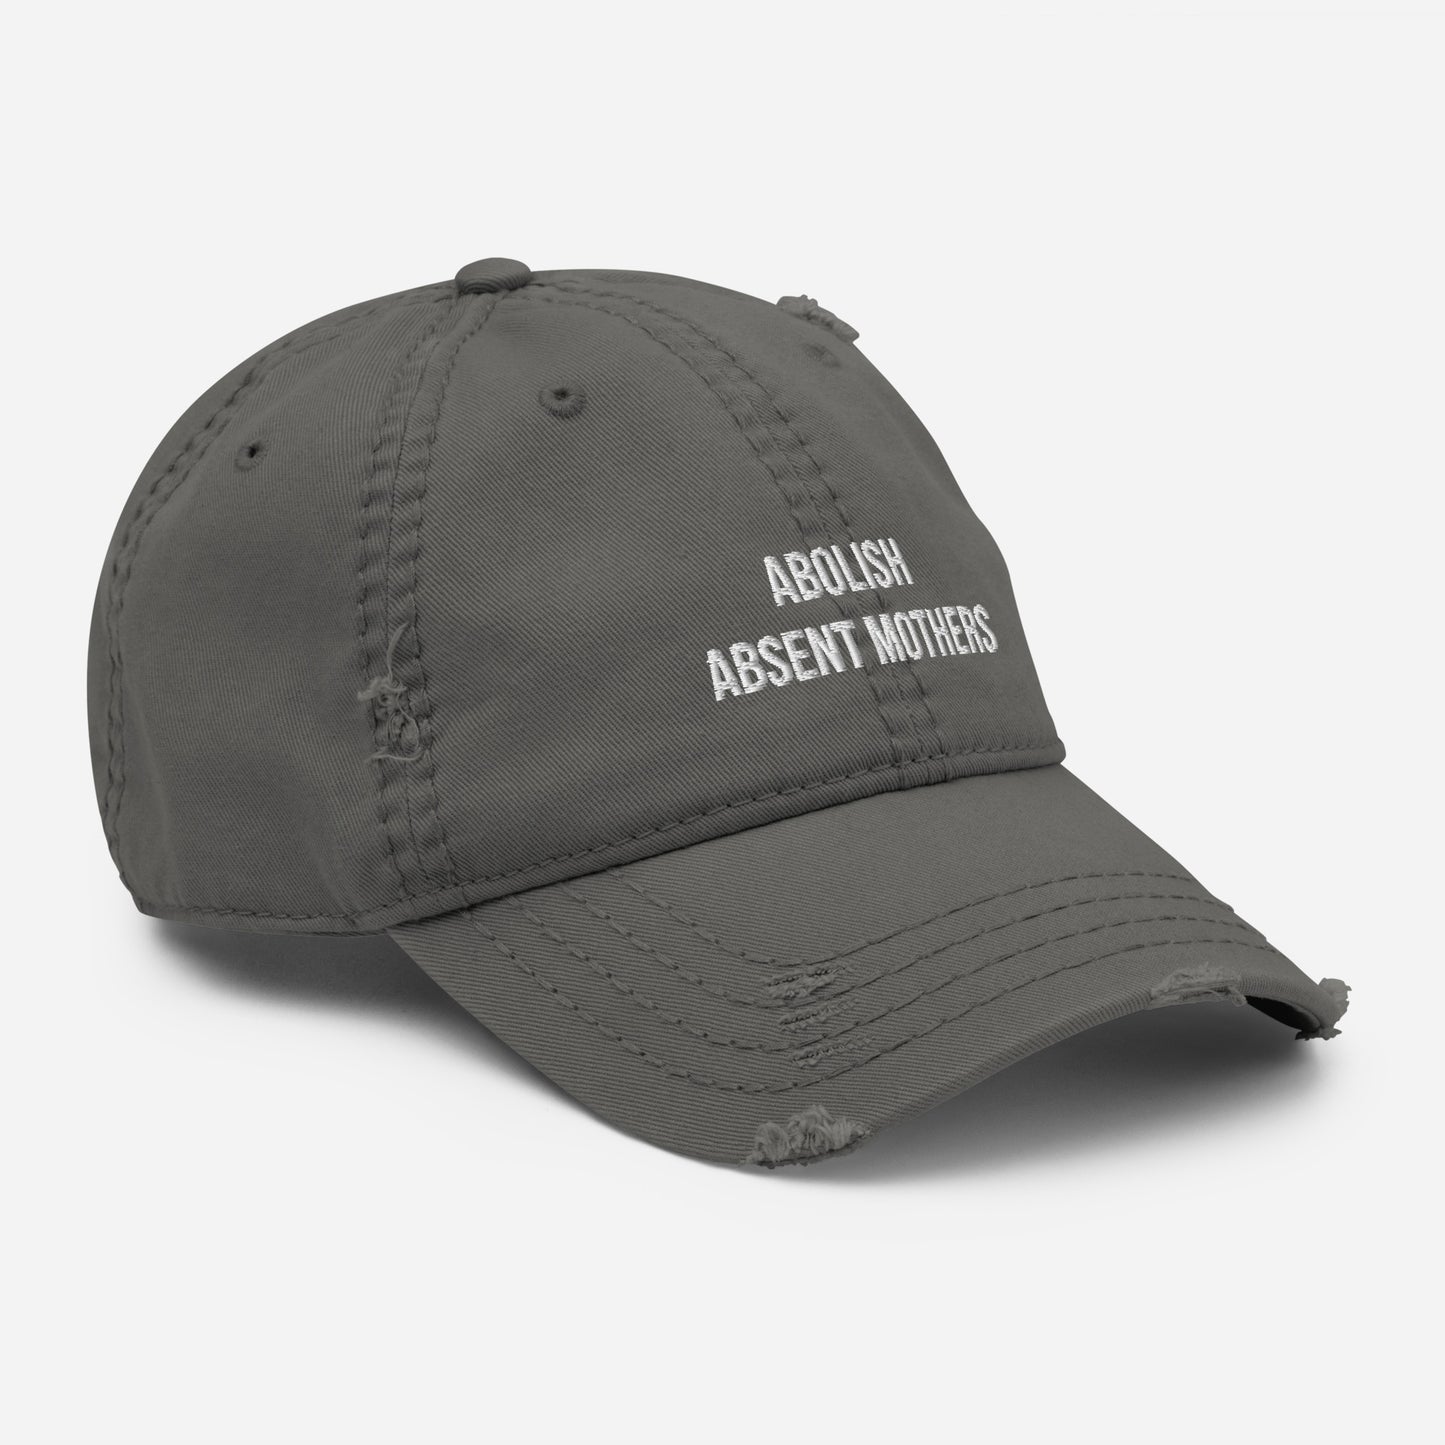 Abolish Absent Mothers Embroidered Distressed Hat